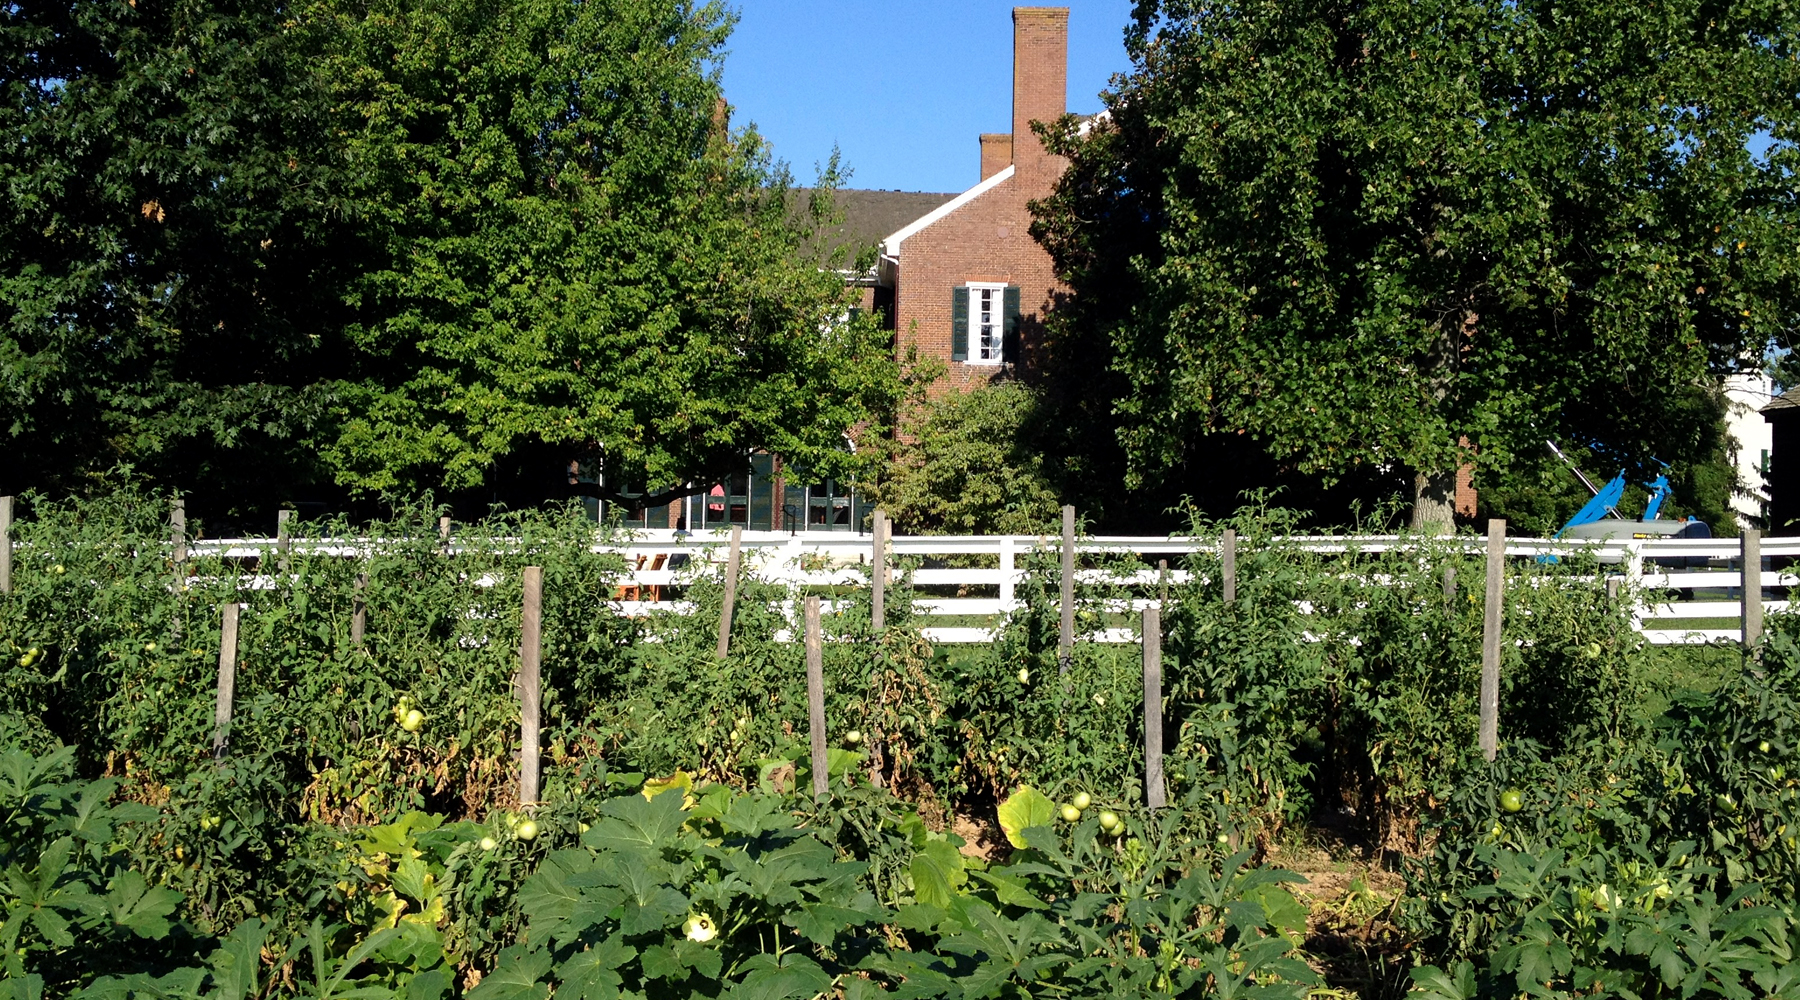 The garden and the Trustees' House at Shaker Village.